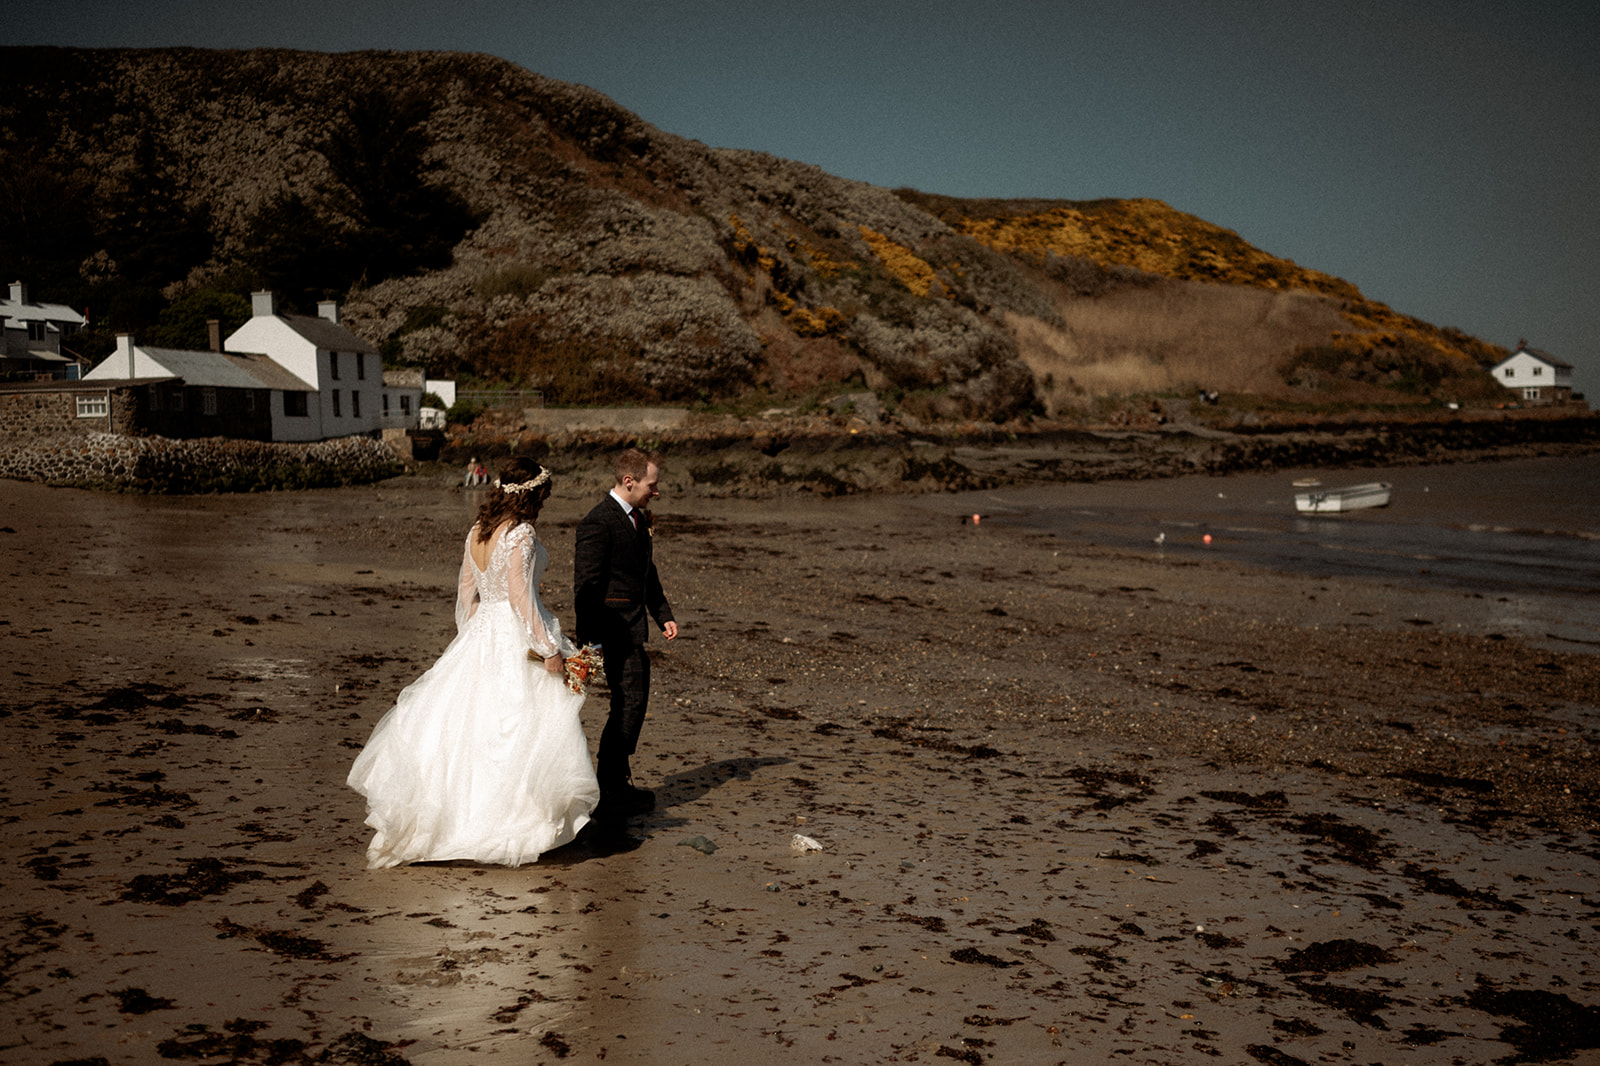 a couple who eloped at Penarth Fawr exchanging vows on the Llyn Peninsula